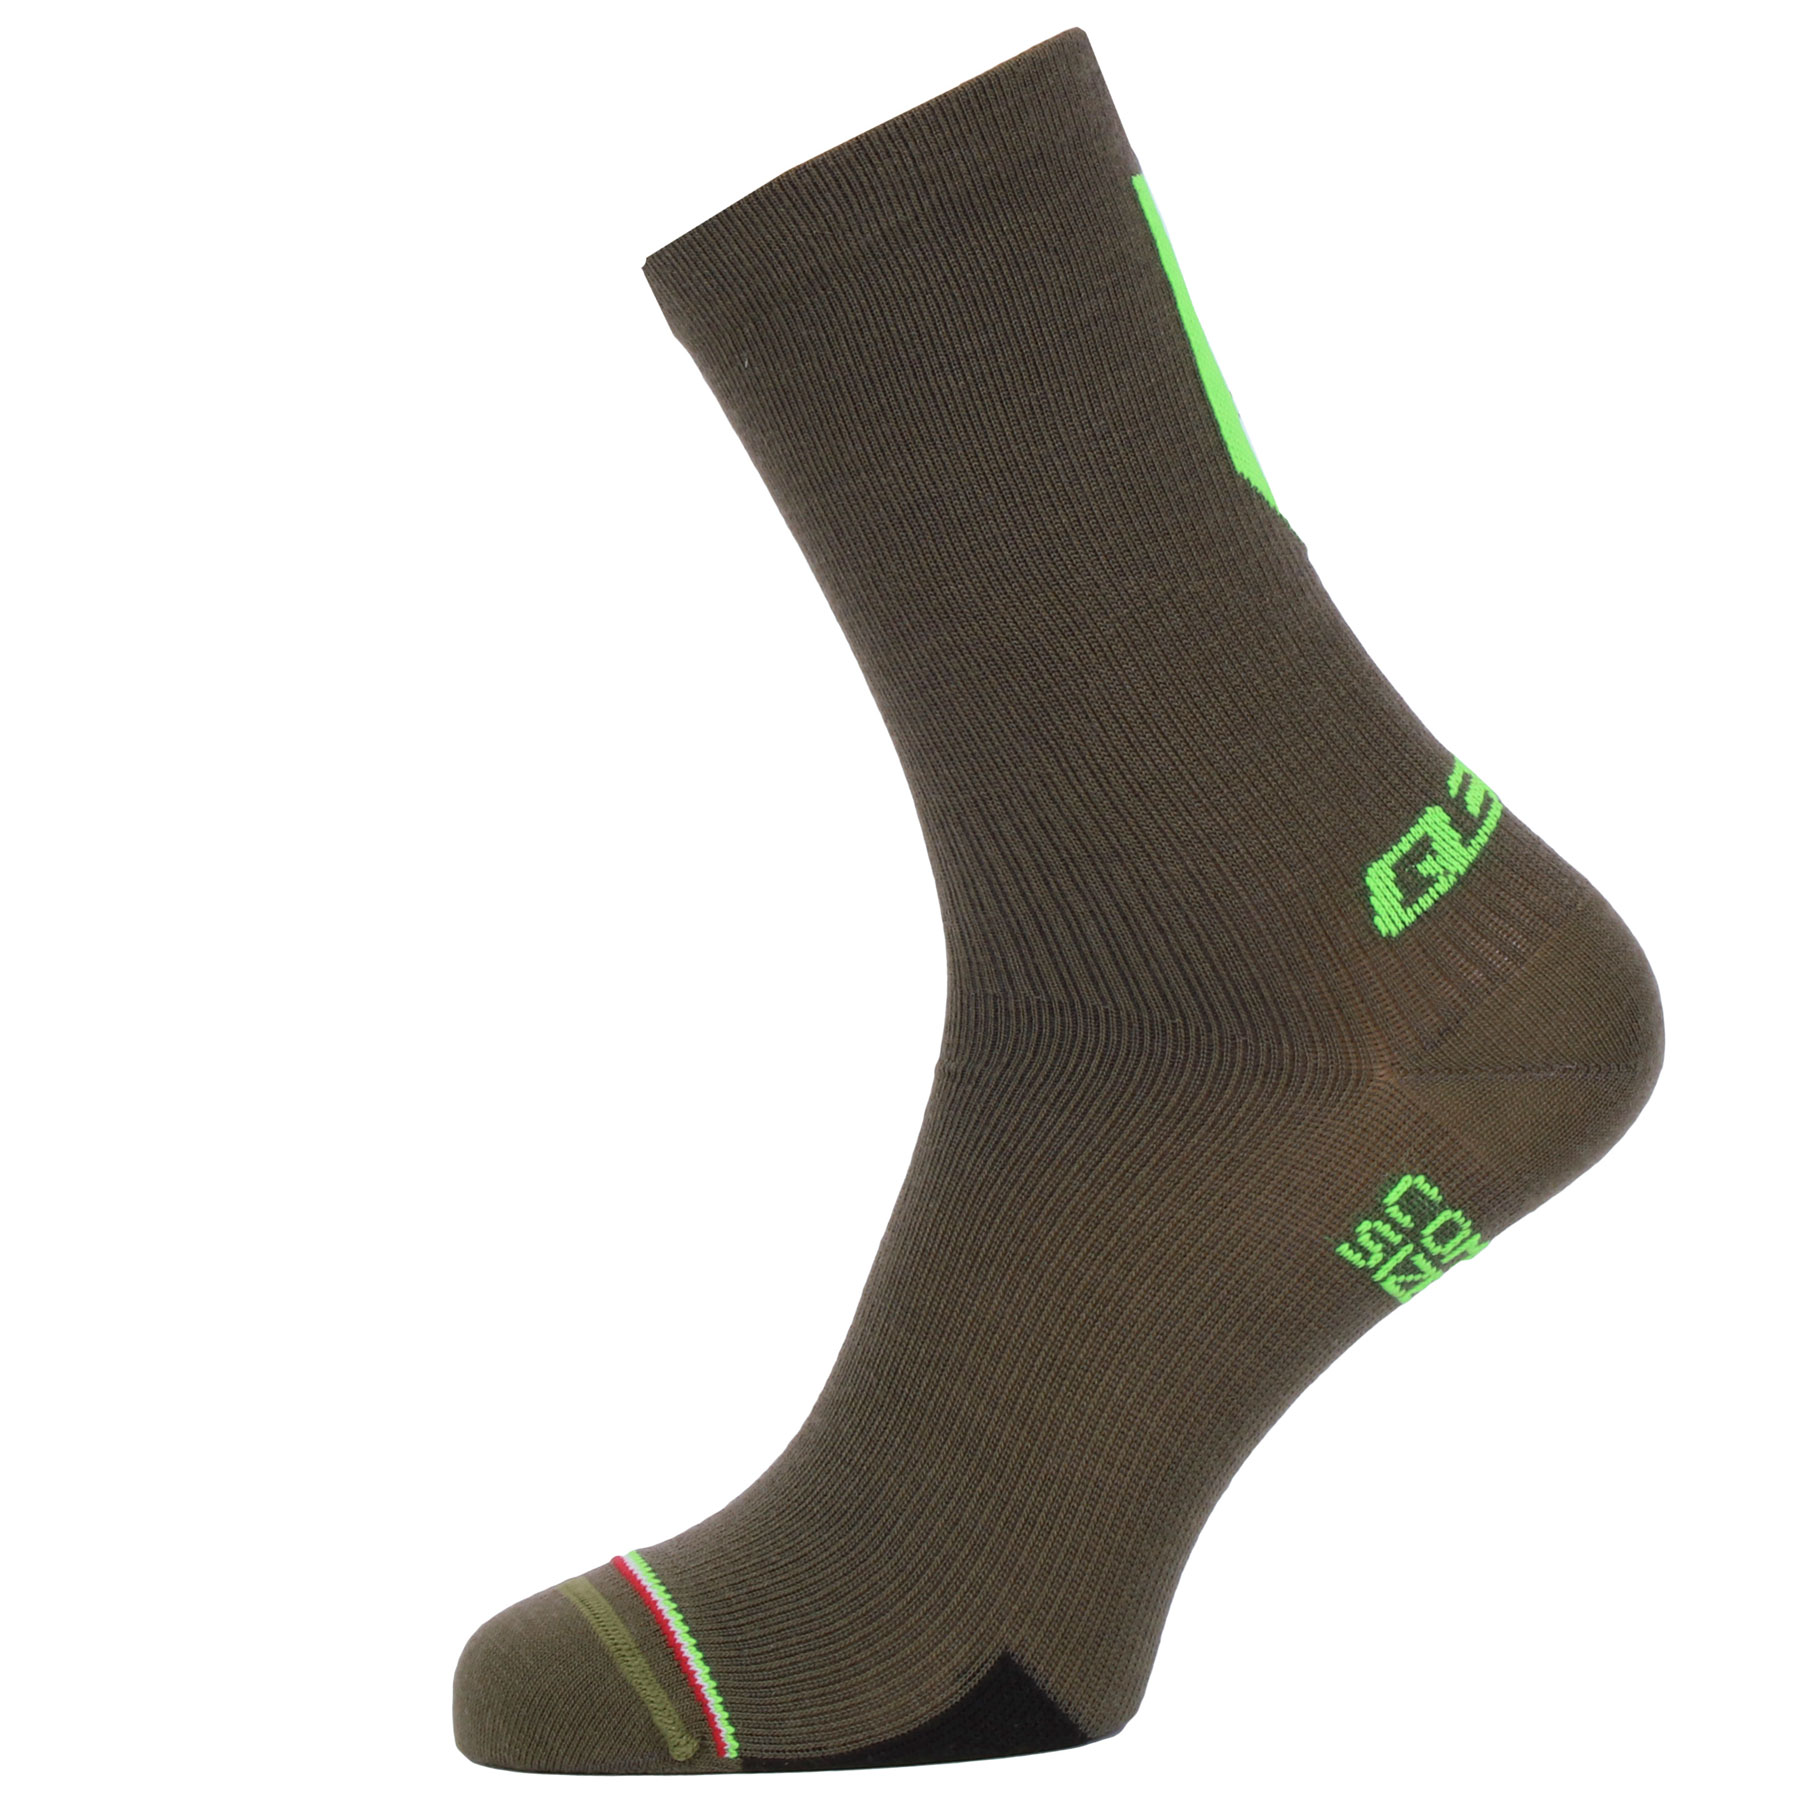 Picture of Q36.5 Compression Wool Cycling Socks - olive green